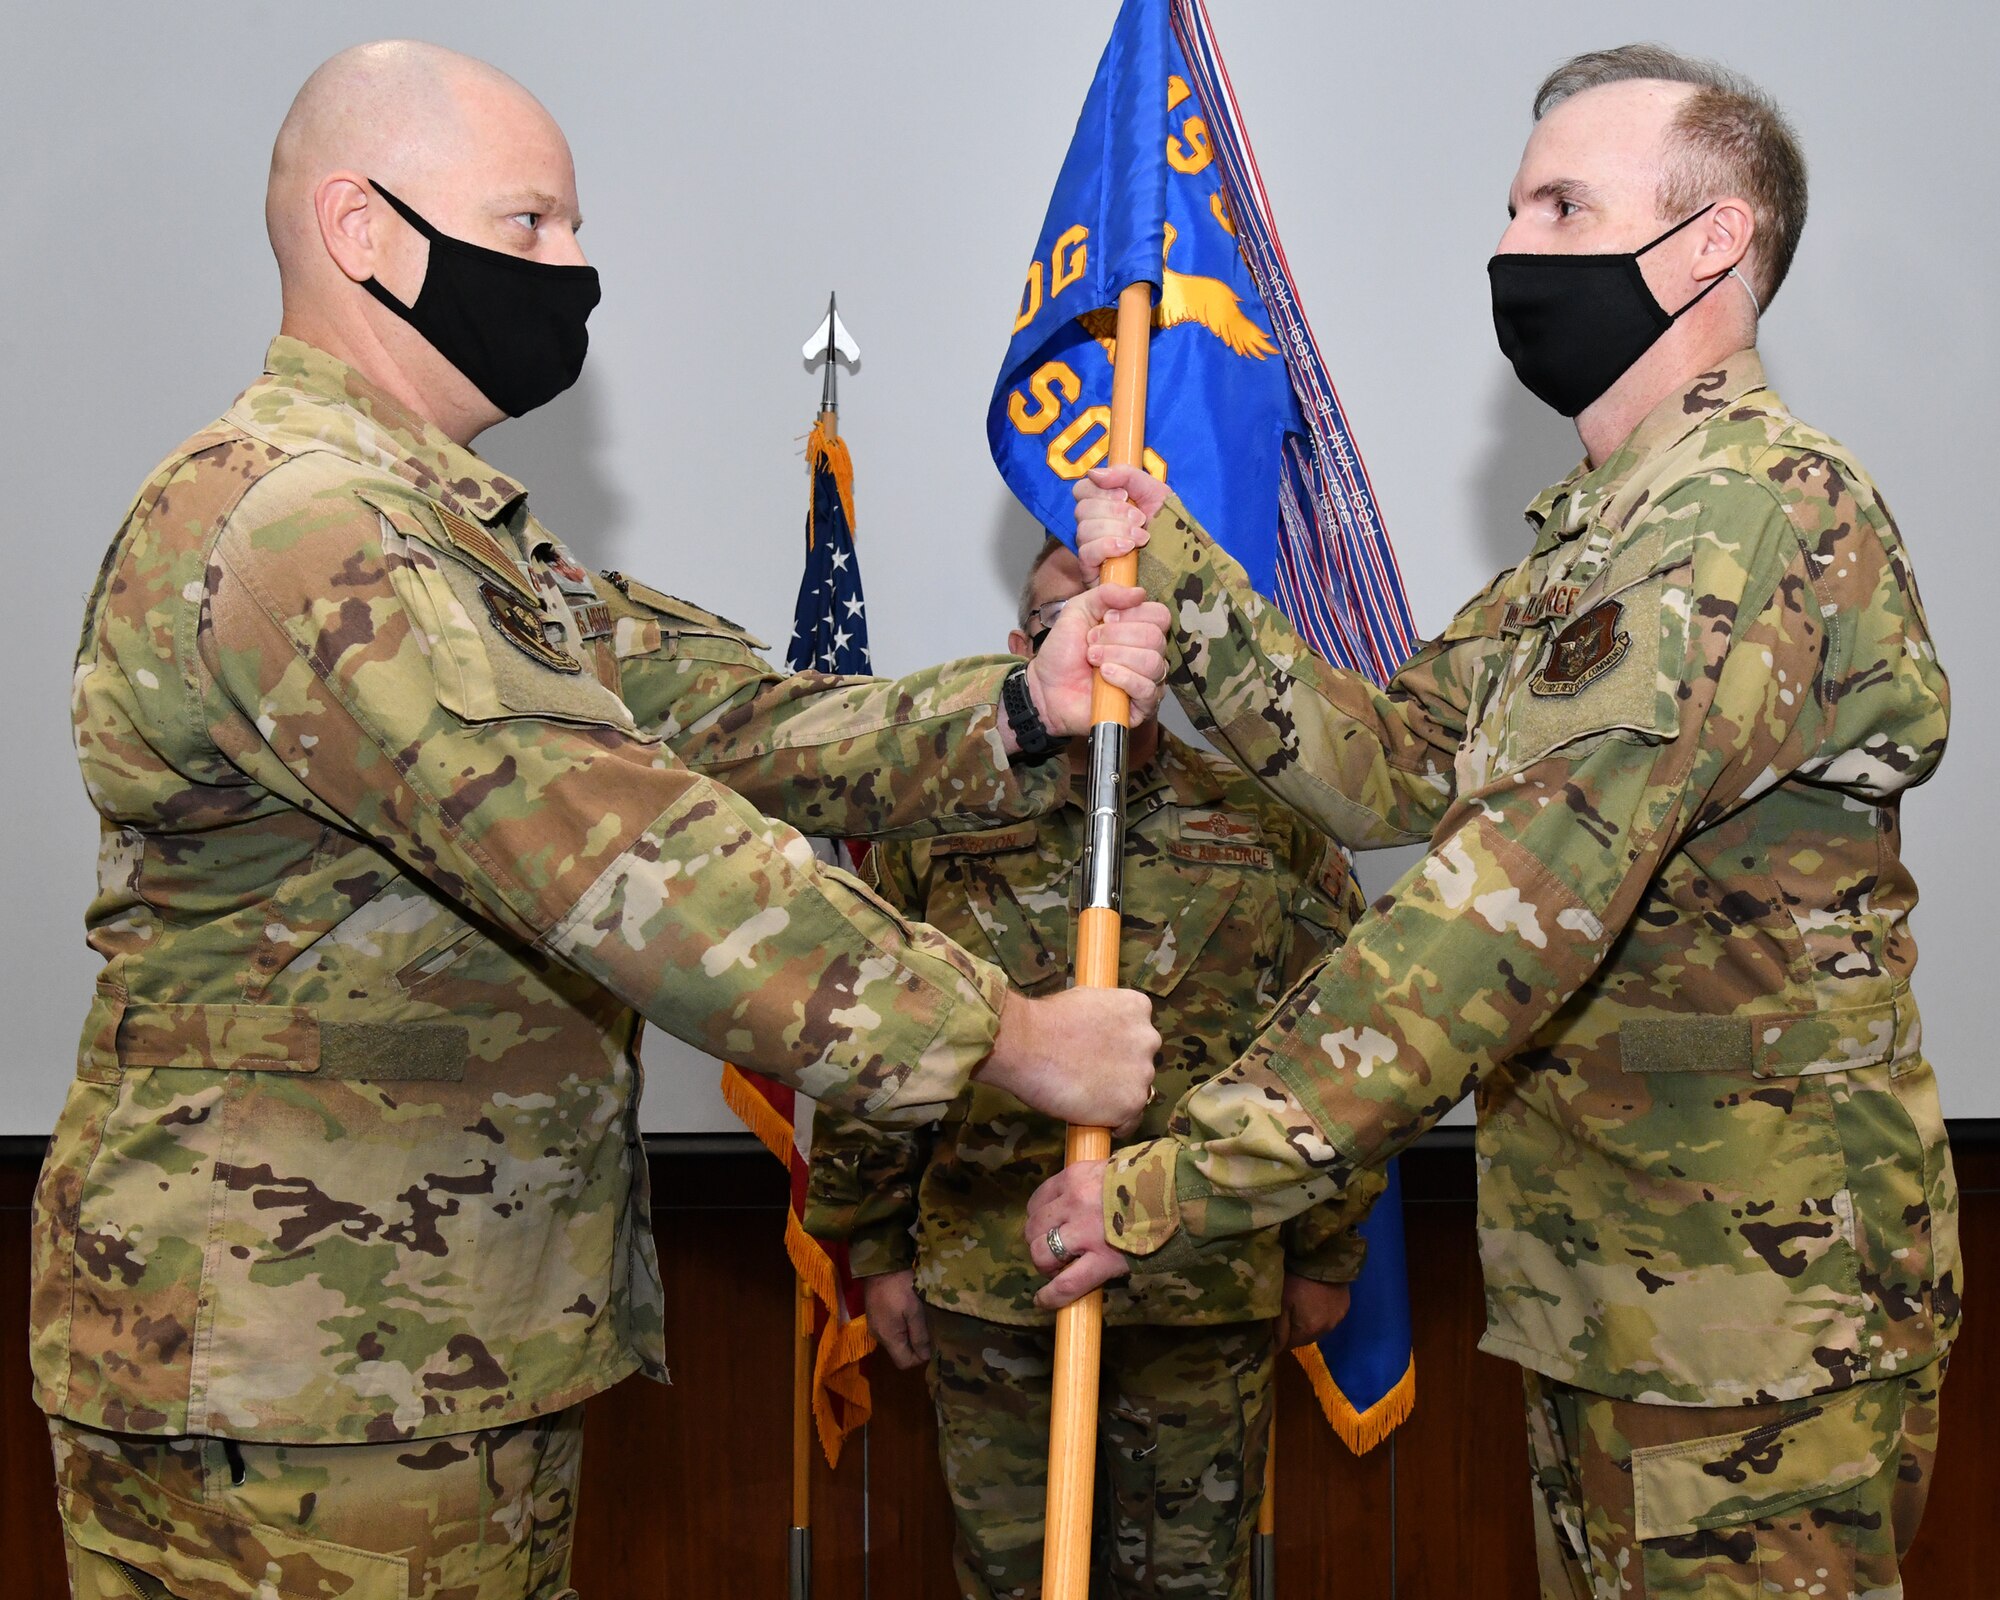 Col. Grandy passes the 919th SOG's unit flag to Col. Barry